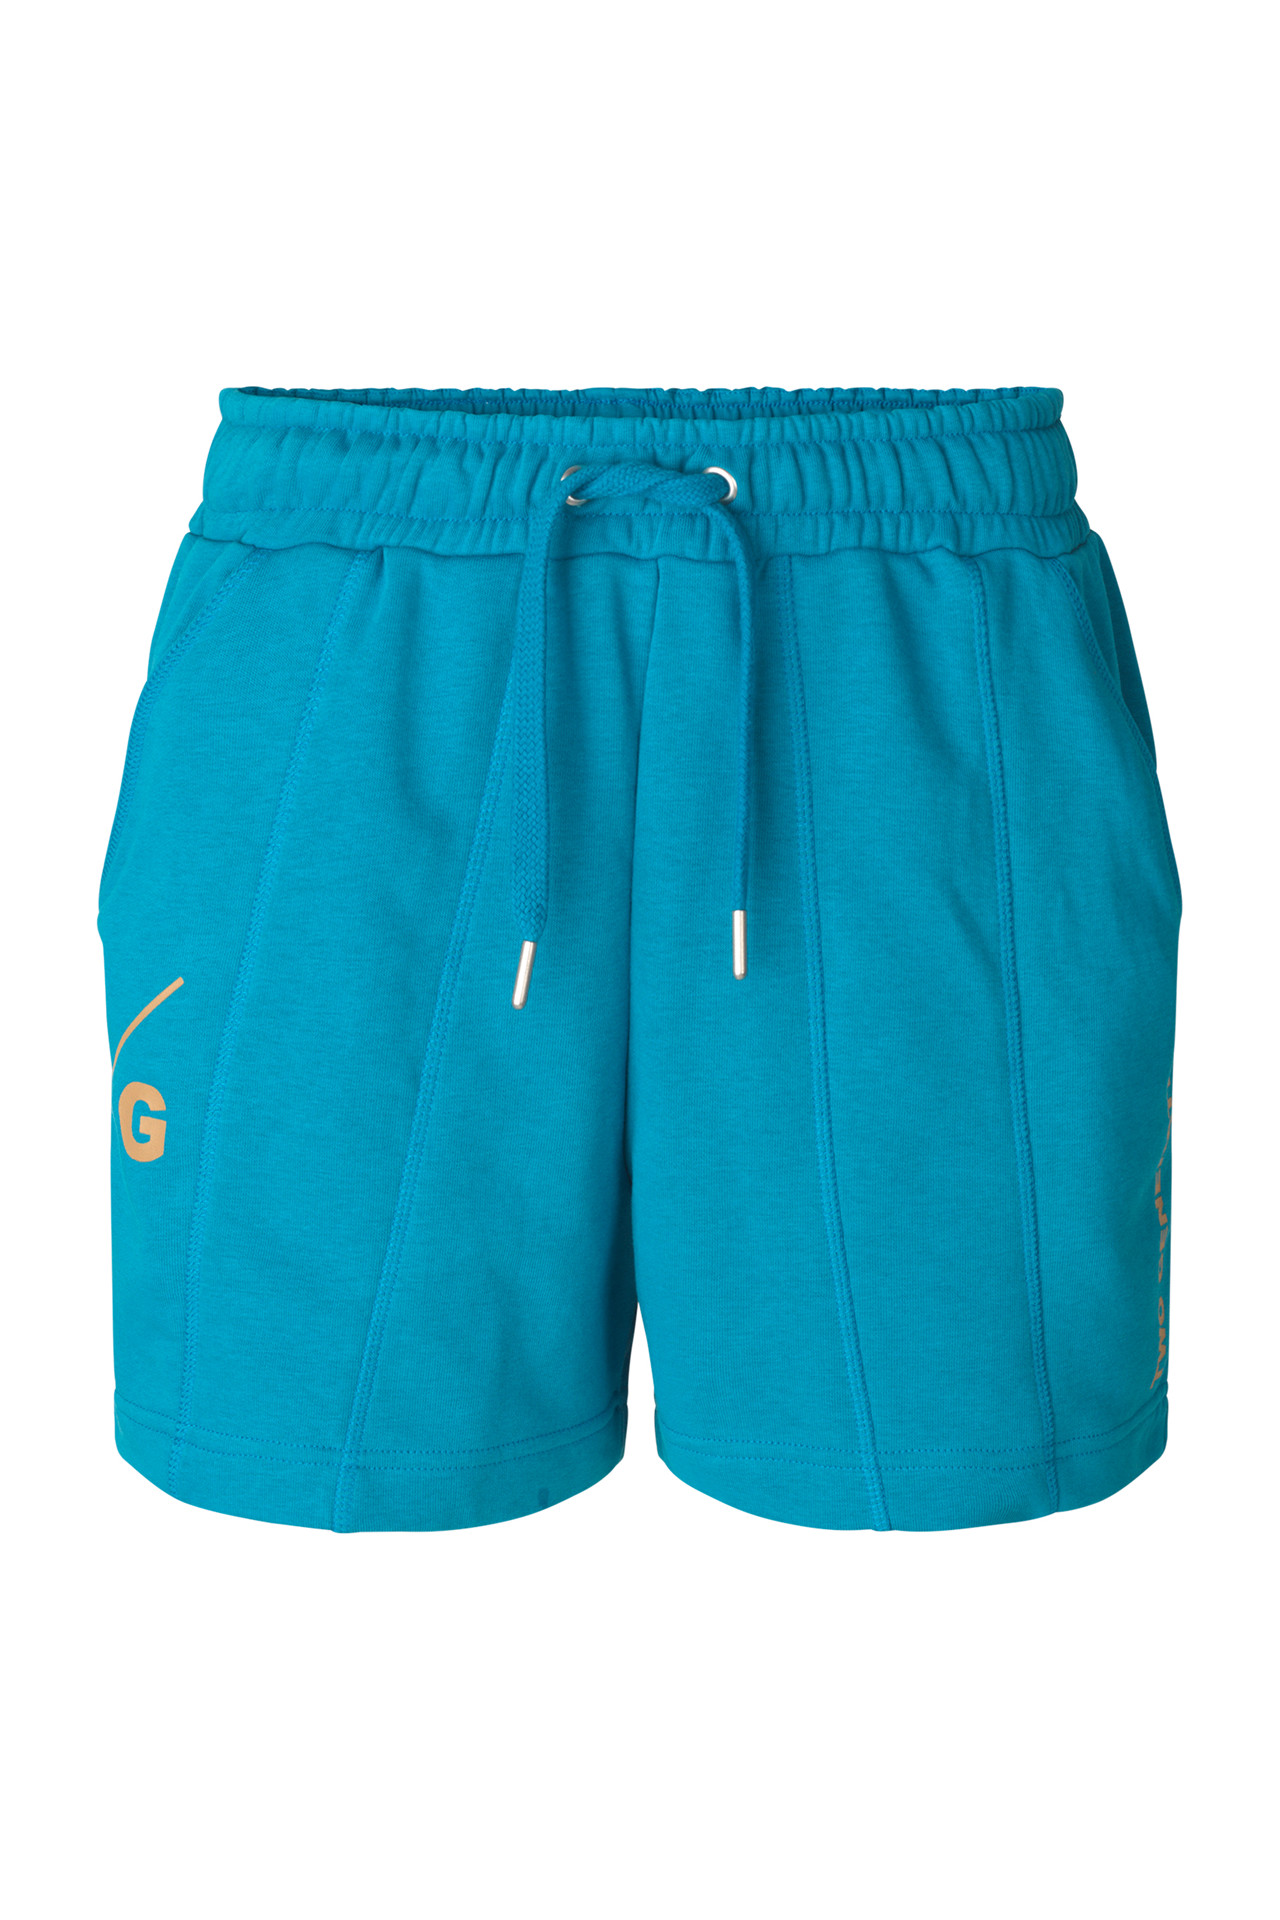 TWO GENERATIONS Tennessee shorts (AZUR BLUE L)